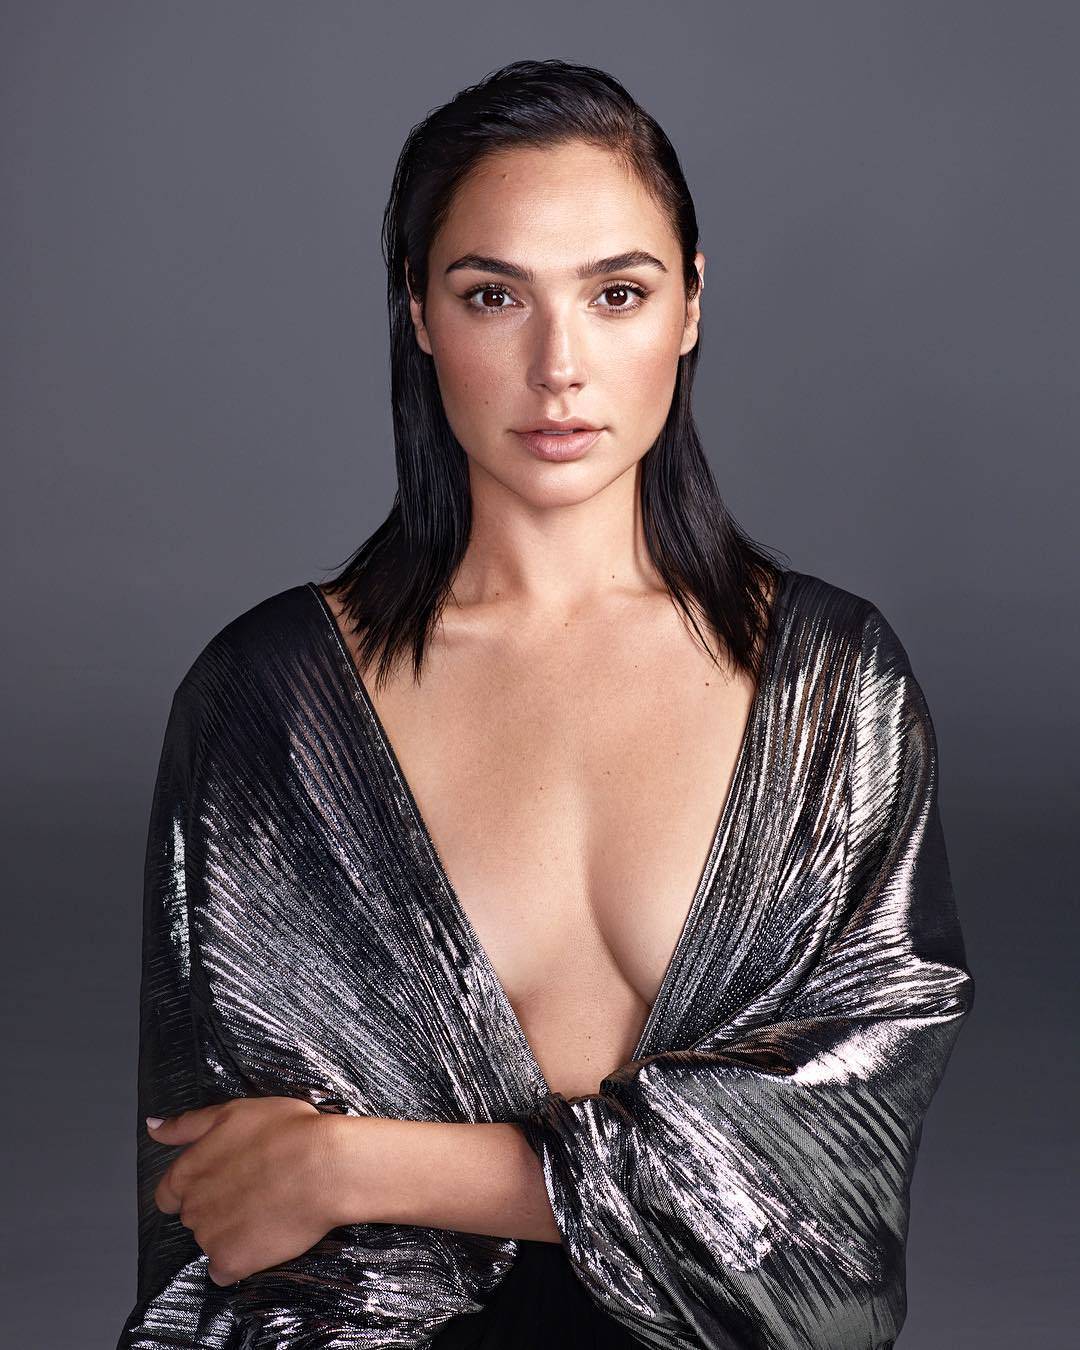 49 Hot Pictures Of Gal Gadot Which Will Make Your Day | Best Of Comic Books